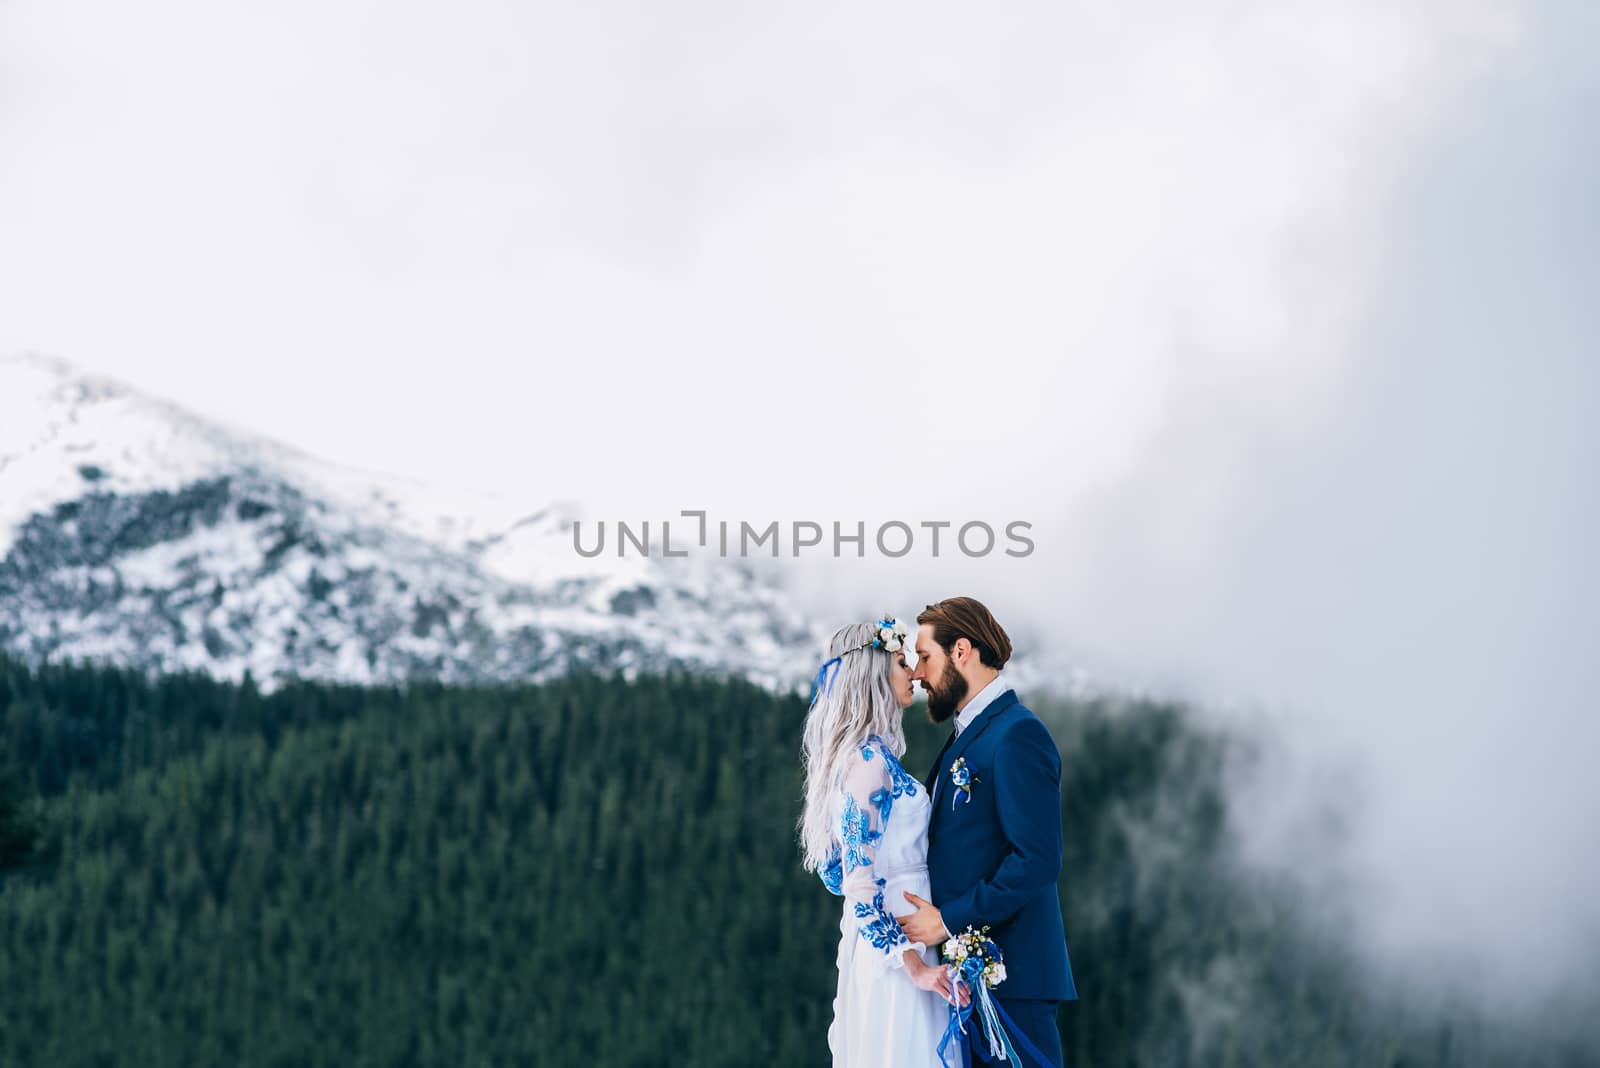 groom in a blue suit and bride in white in the mountains Carpath by Andreua